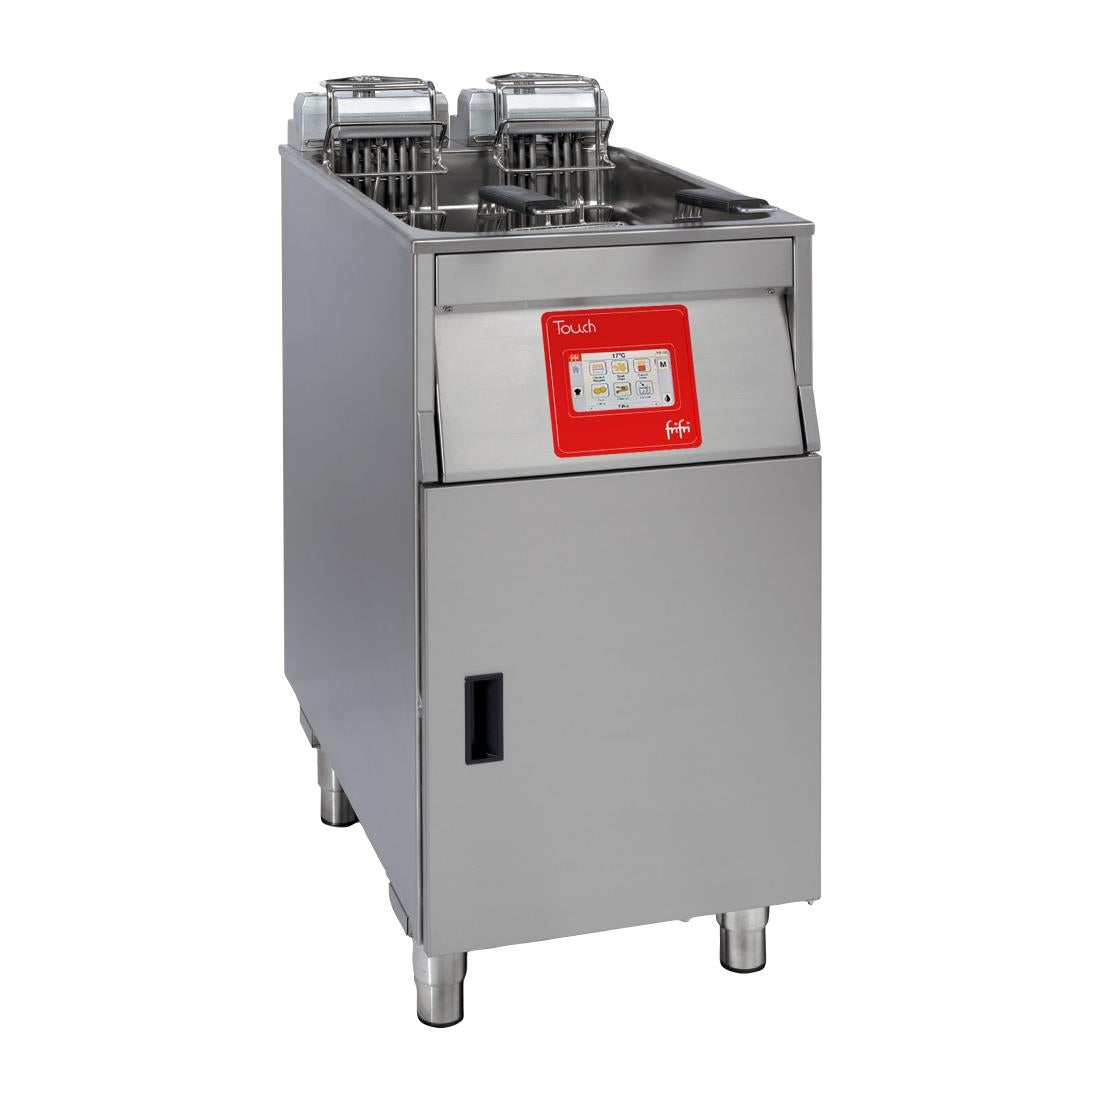 CX896 FriFri Touch 412 Electric Free Standing Single Tank Filtration Fryer TL412M31G0 JD Catering Equipment Solutions Ltd